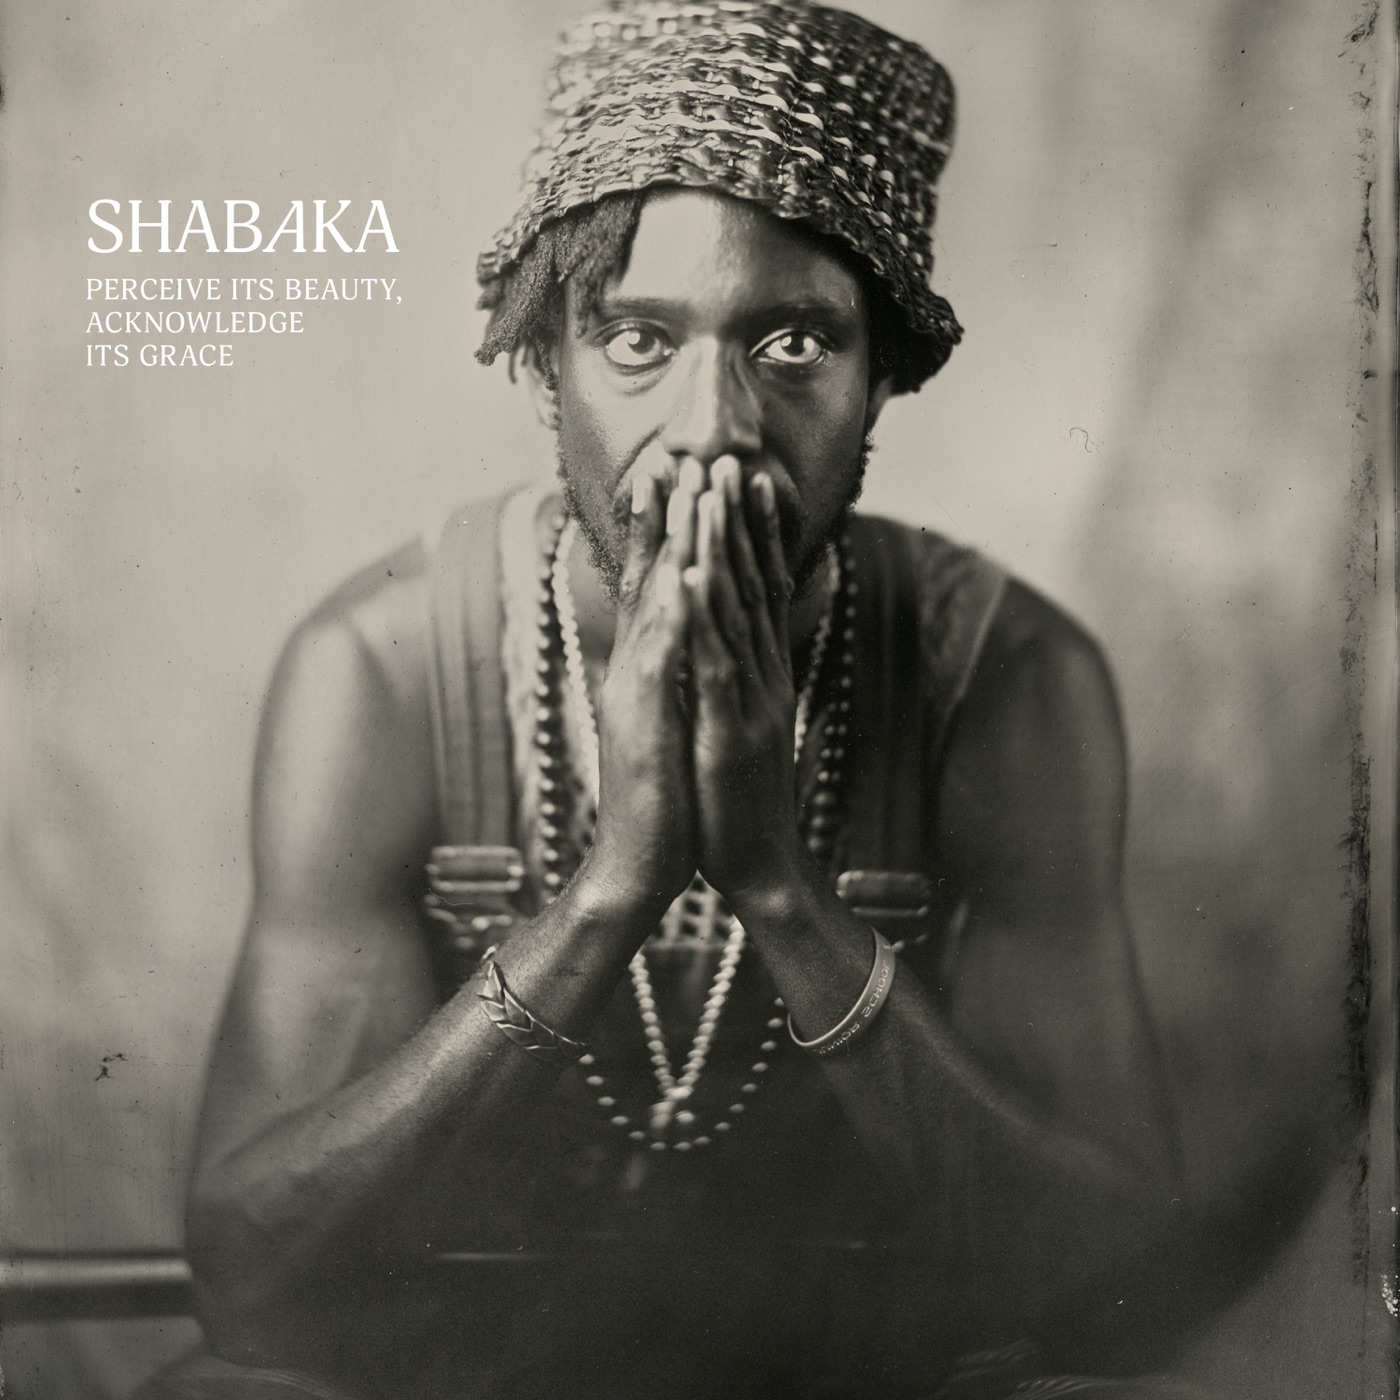 Perceive Its Beauty, Acknowledge Its Grace by Shabaka